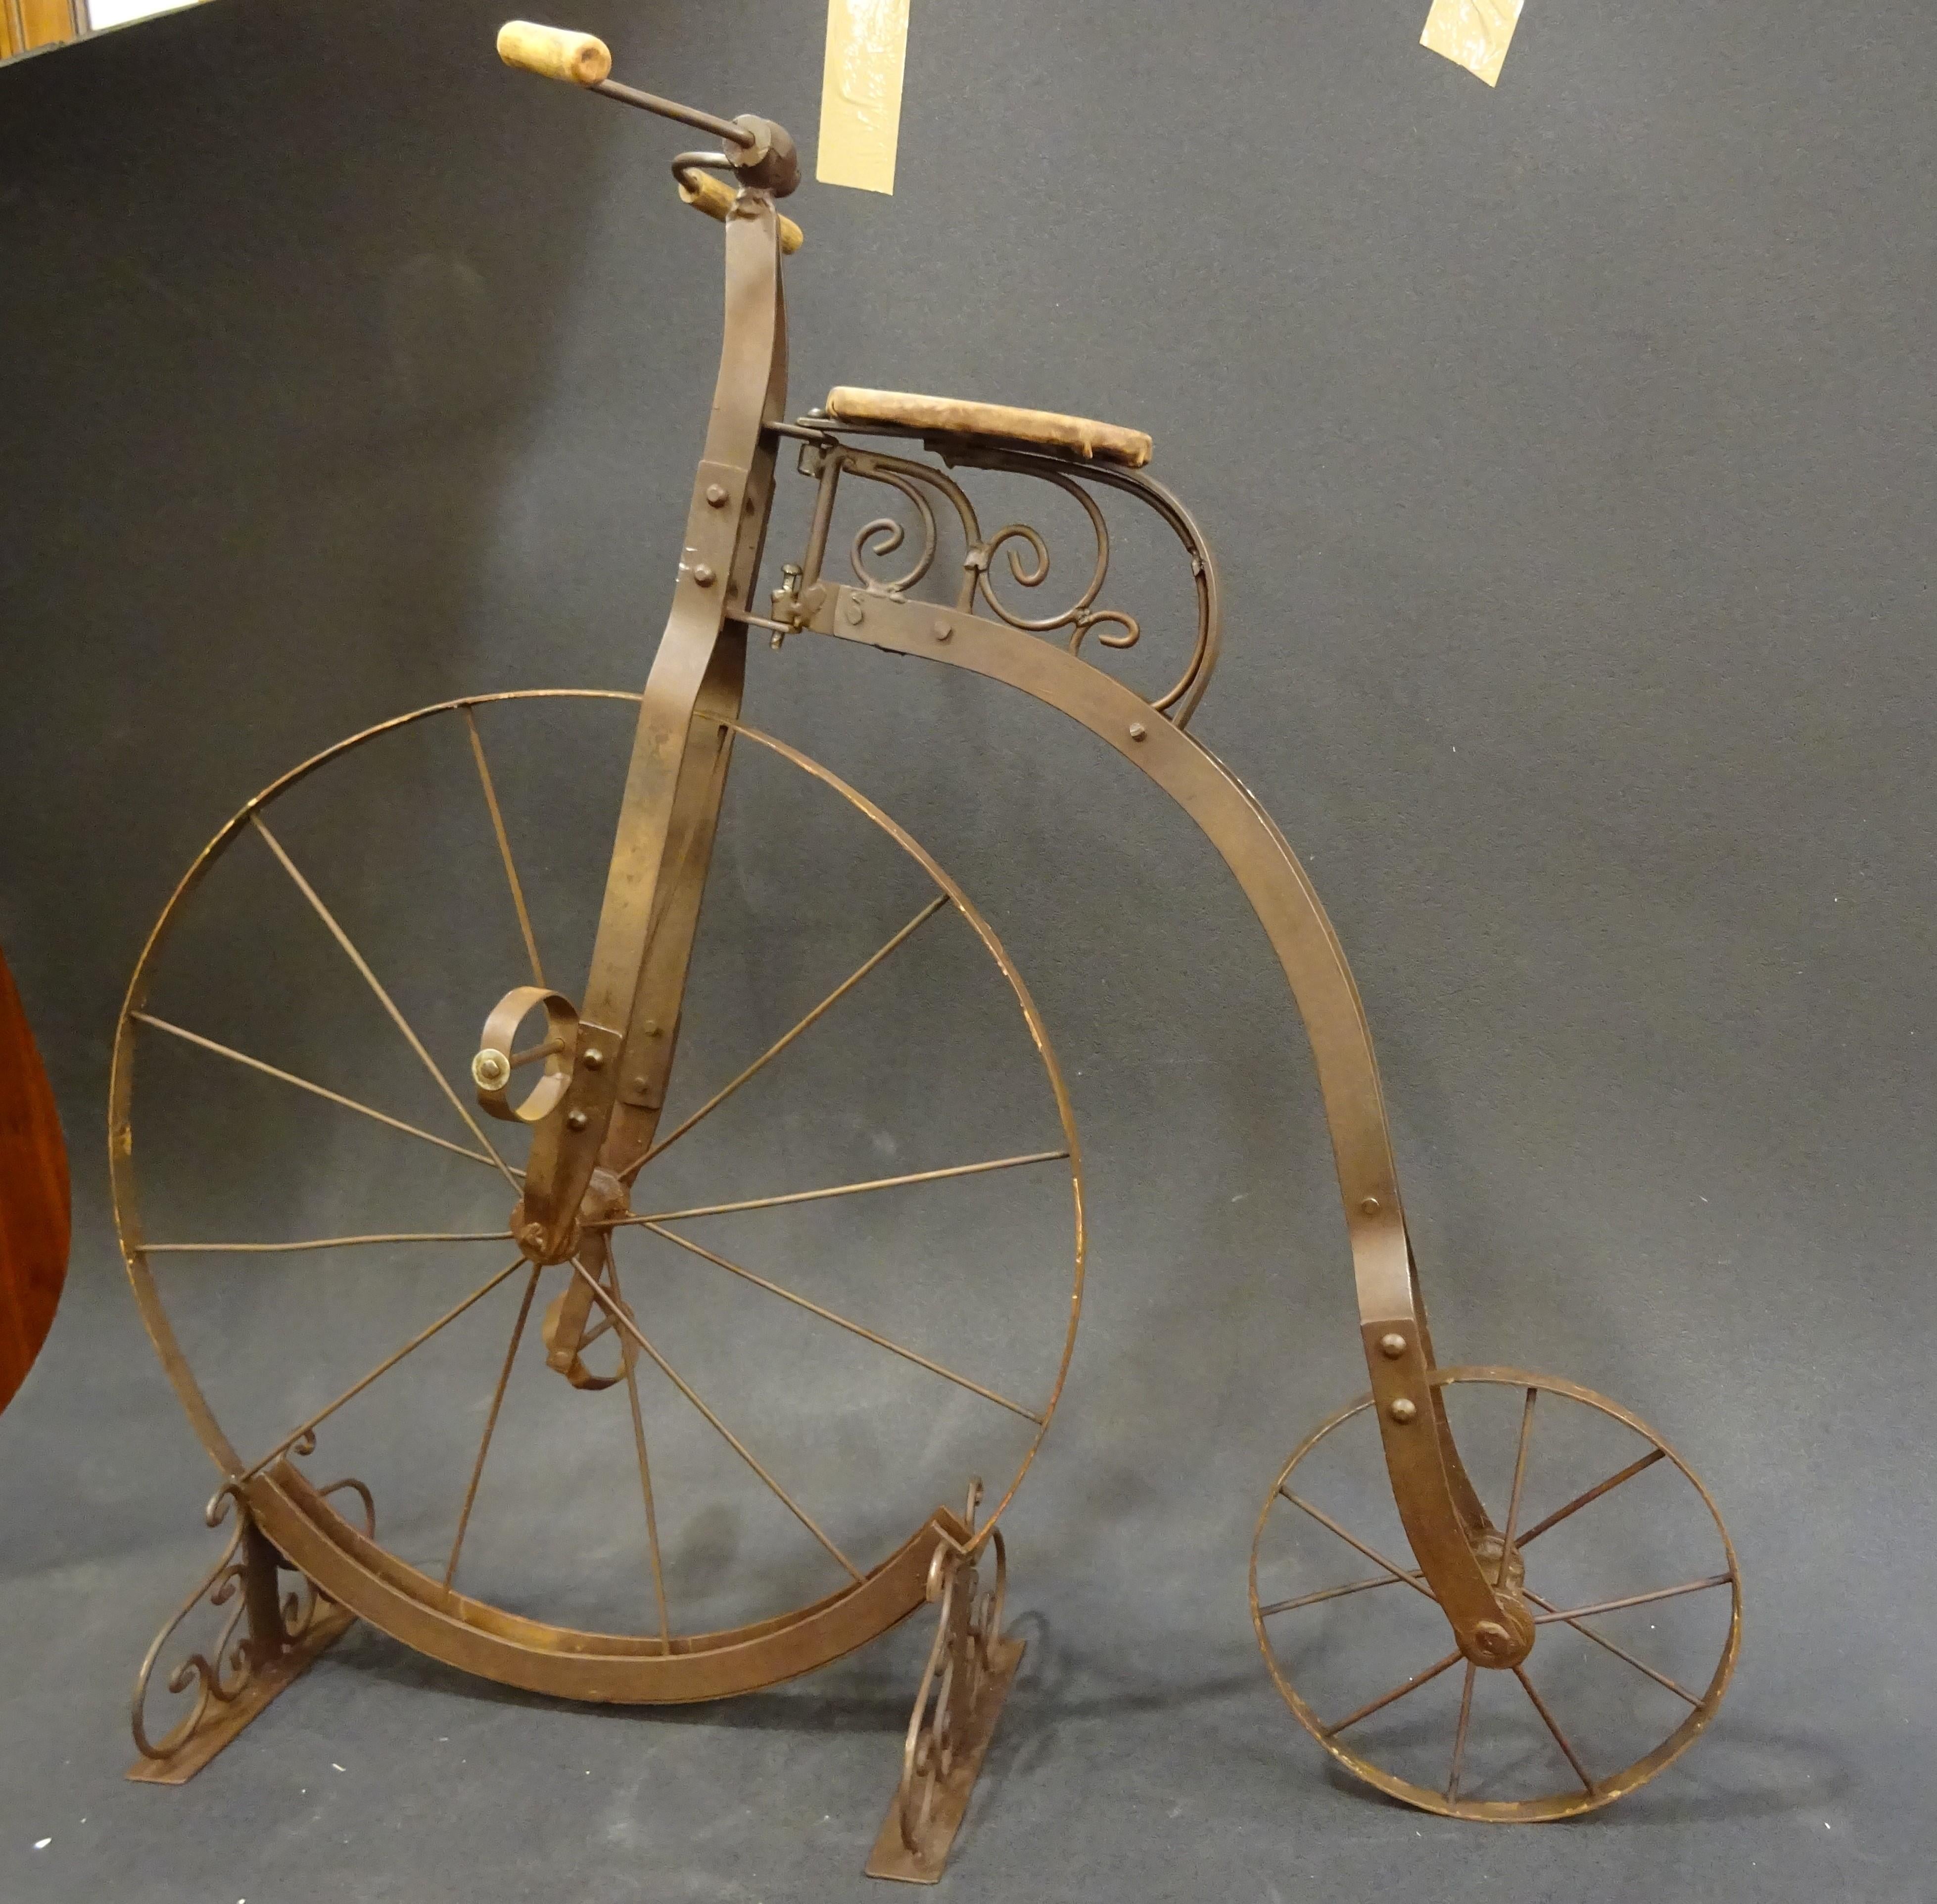 An antique Penny- Farthing bicycle for children from the early 20th century. It is made of twisted iron bars forged and fully bonded togheter by struck rivets. The wheels are made of metal as well without a rubber strip.
They are not warped and no